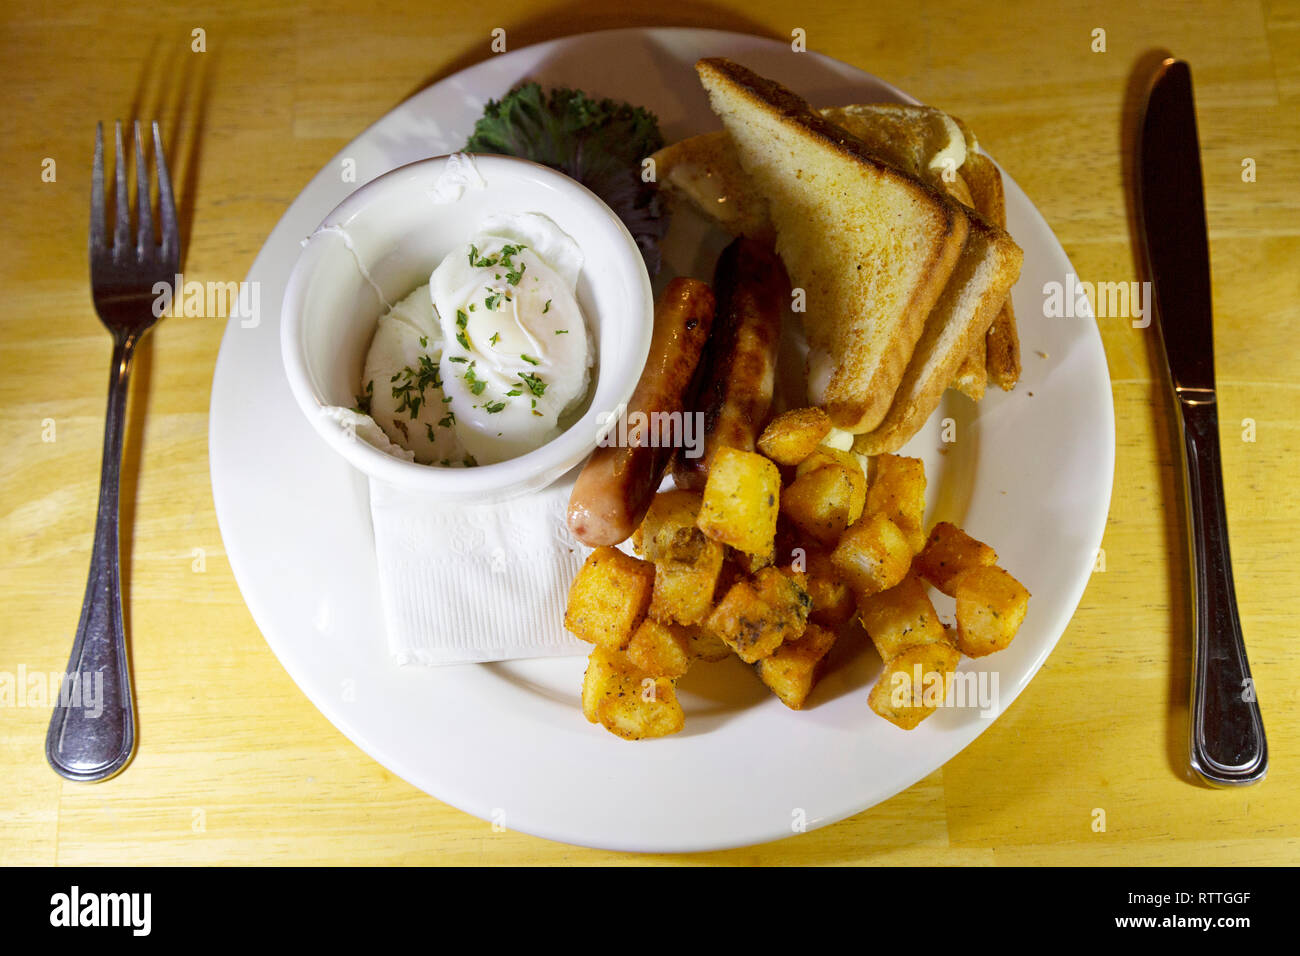 A Canadian breakfast served in Manitoba, Canada. It features sausages, a poached egg, toast and hash potatoes. Stock Photo